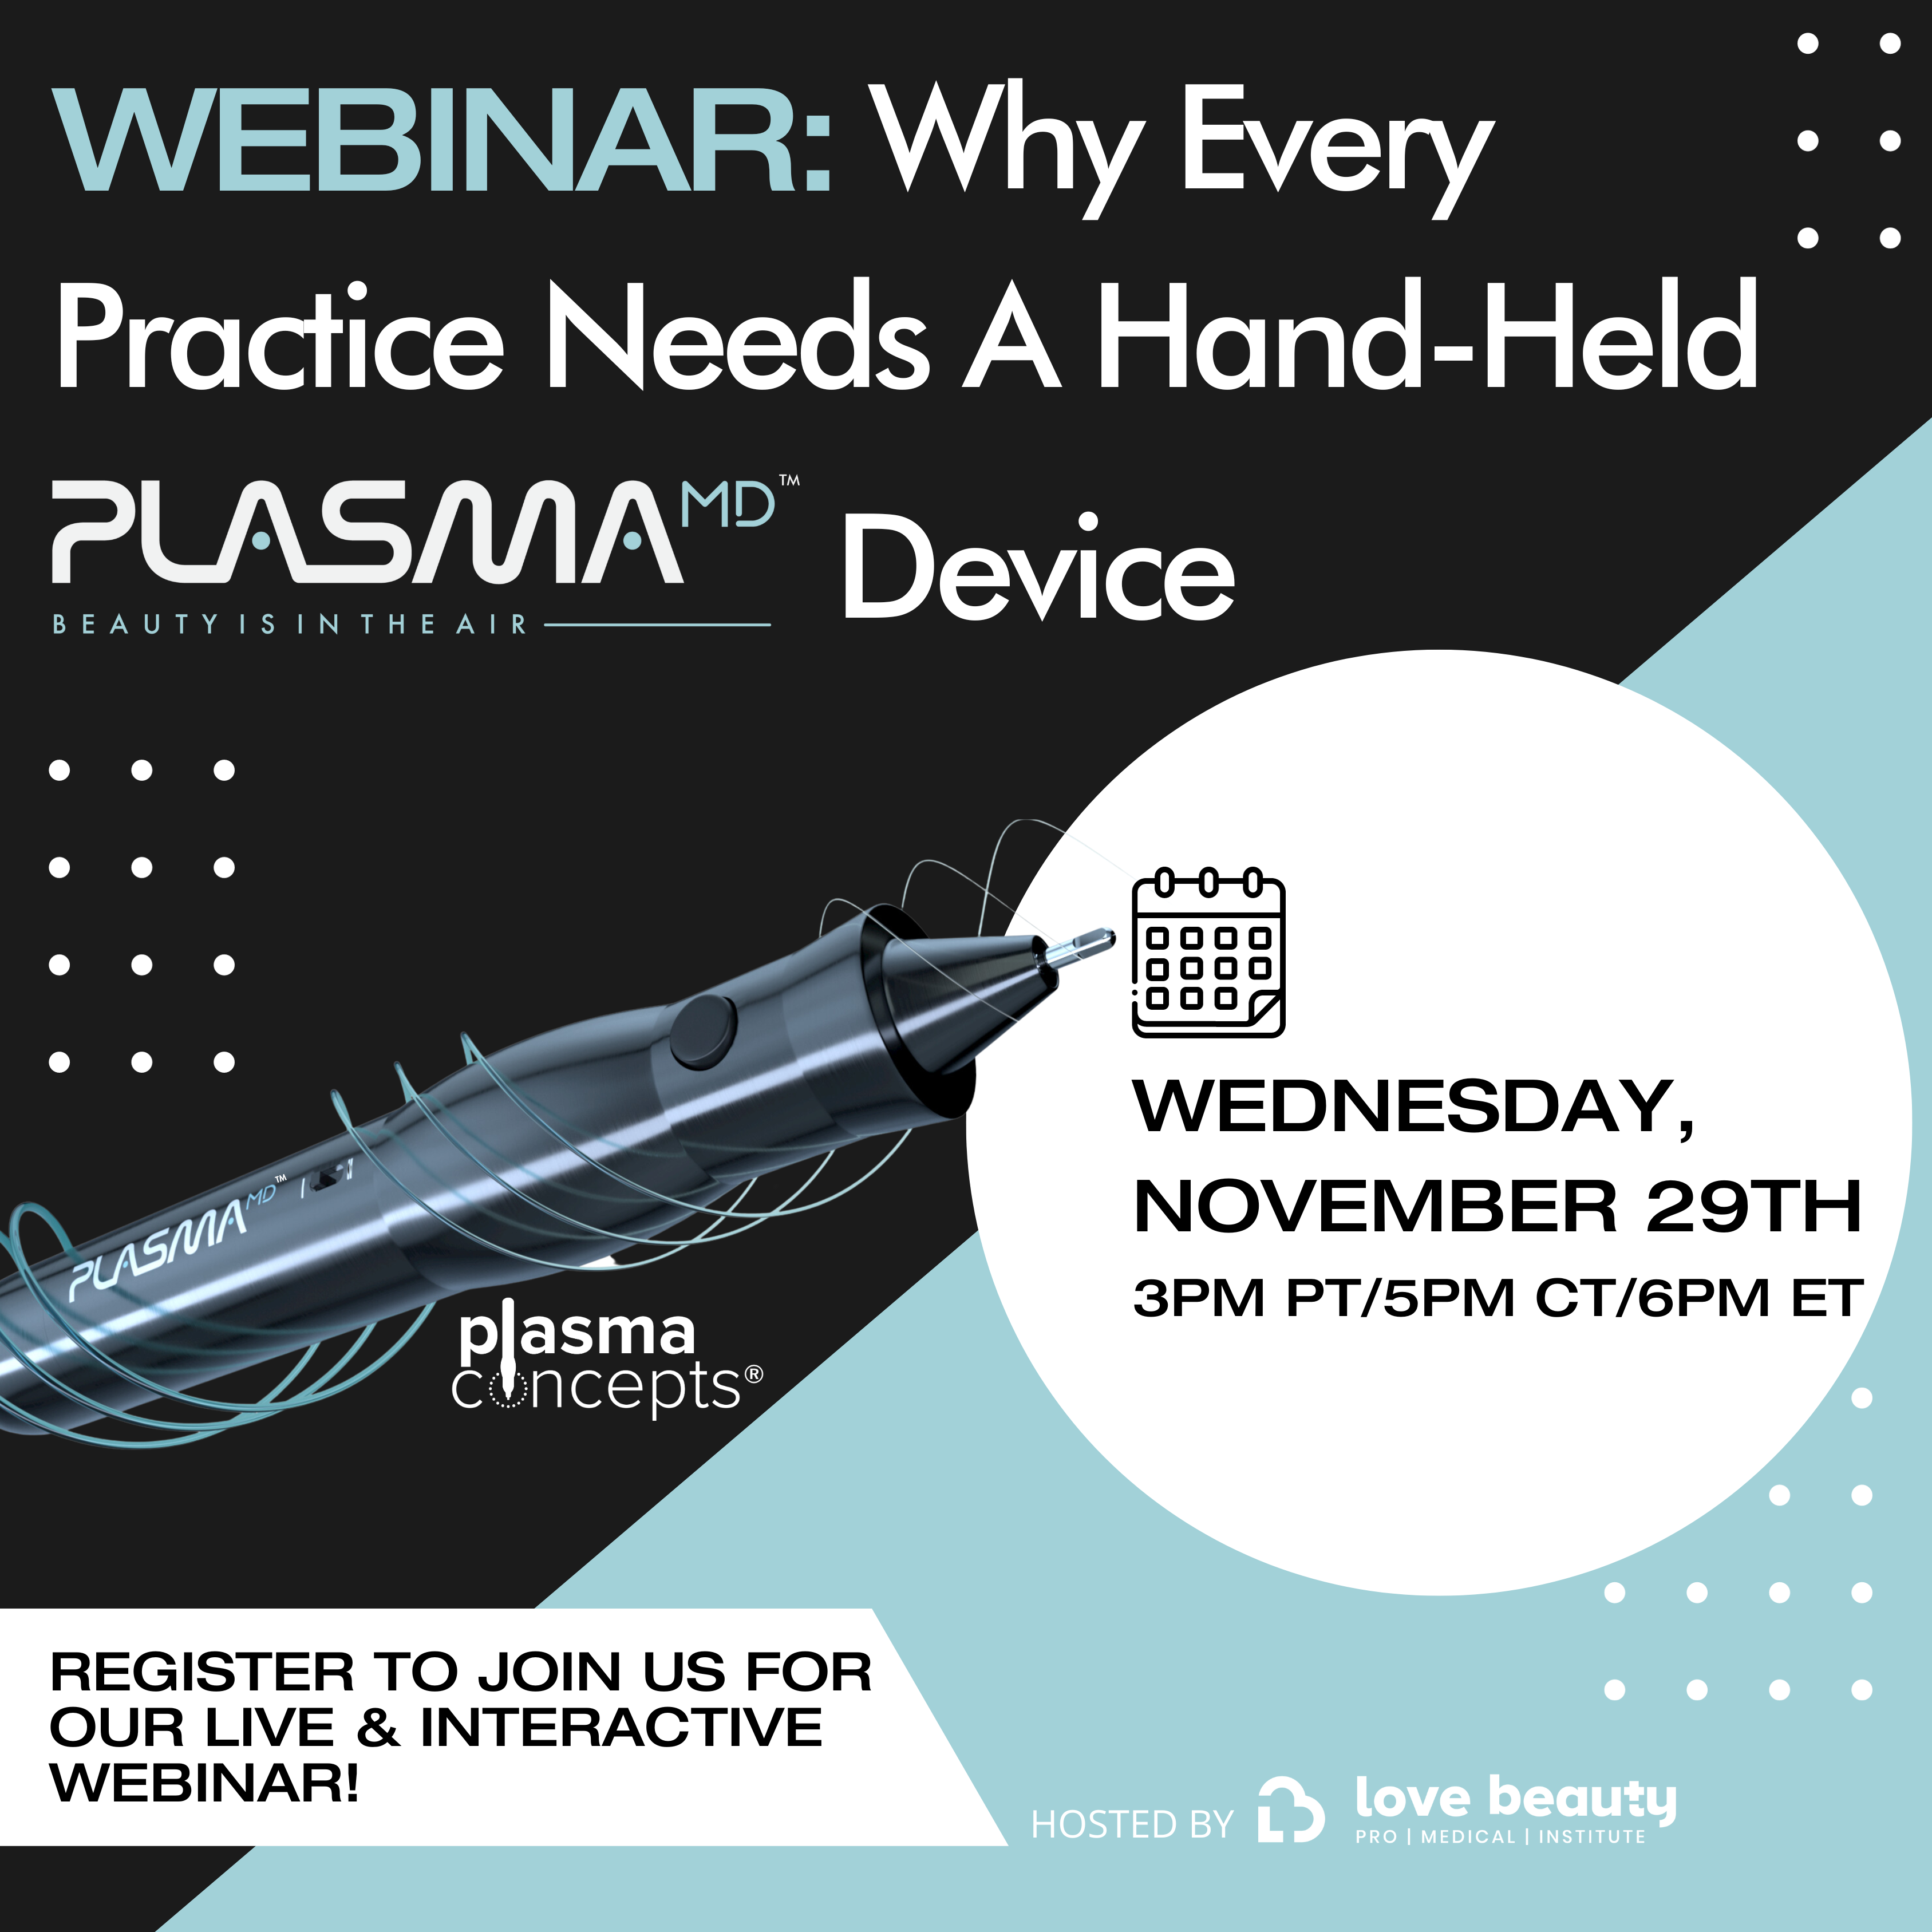 LIVE & INTERACTIVE WEBINAR: Why Every Practice Needs A Hand-Held PlasmaMD™ Device